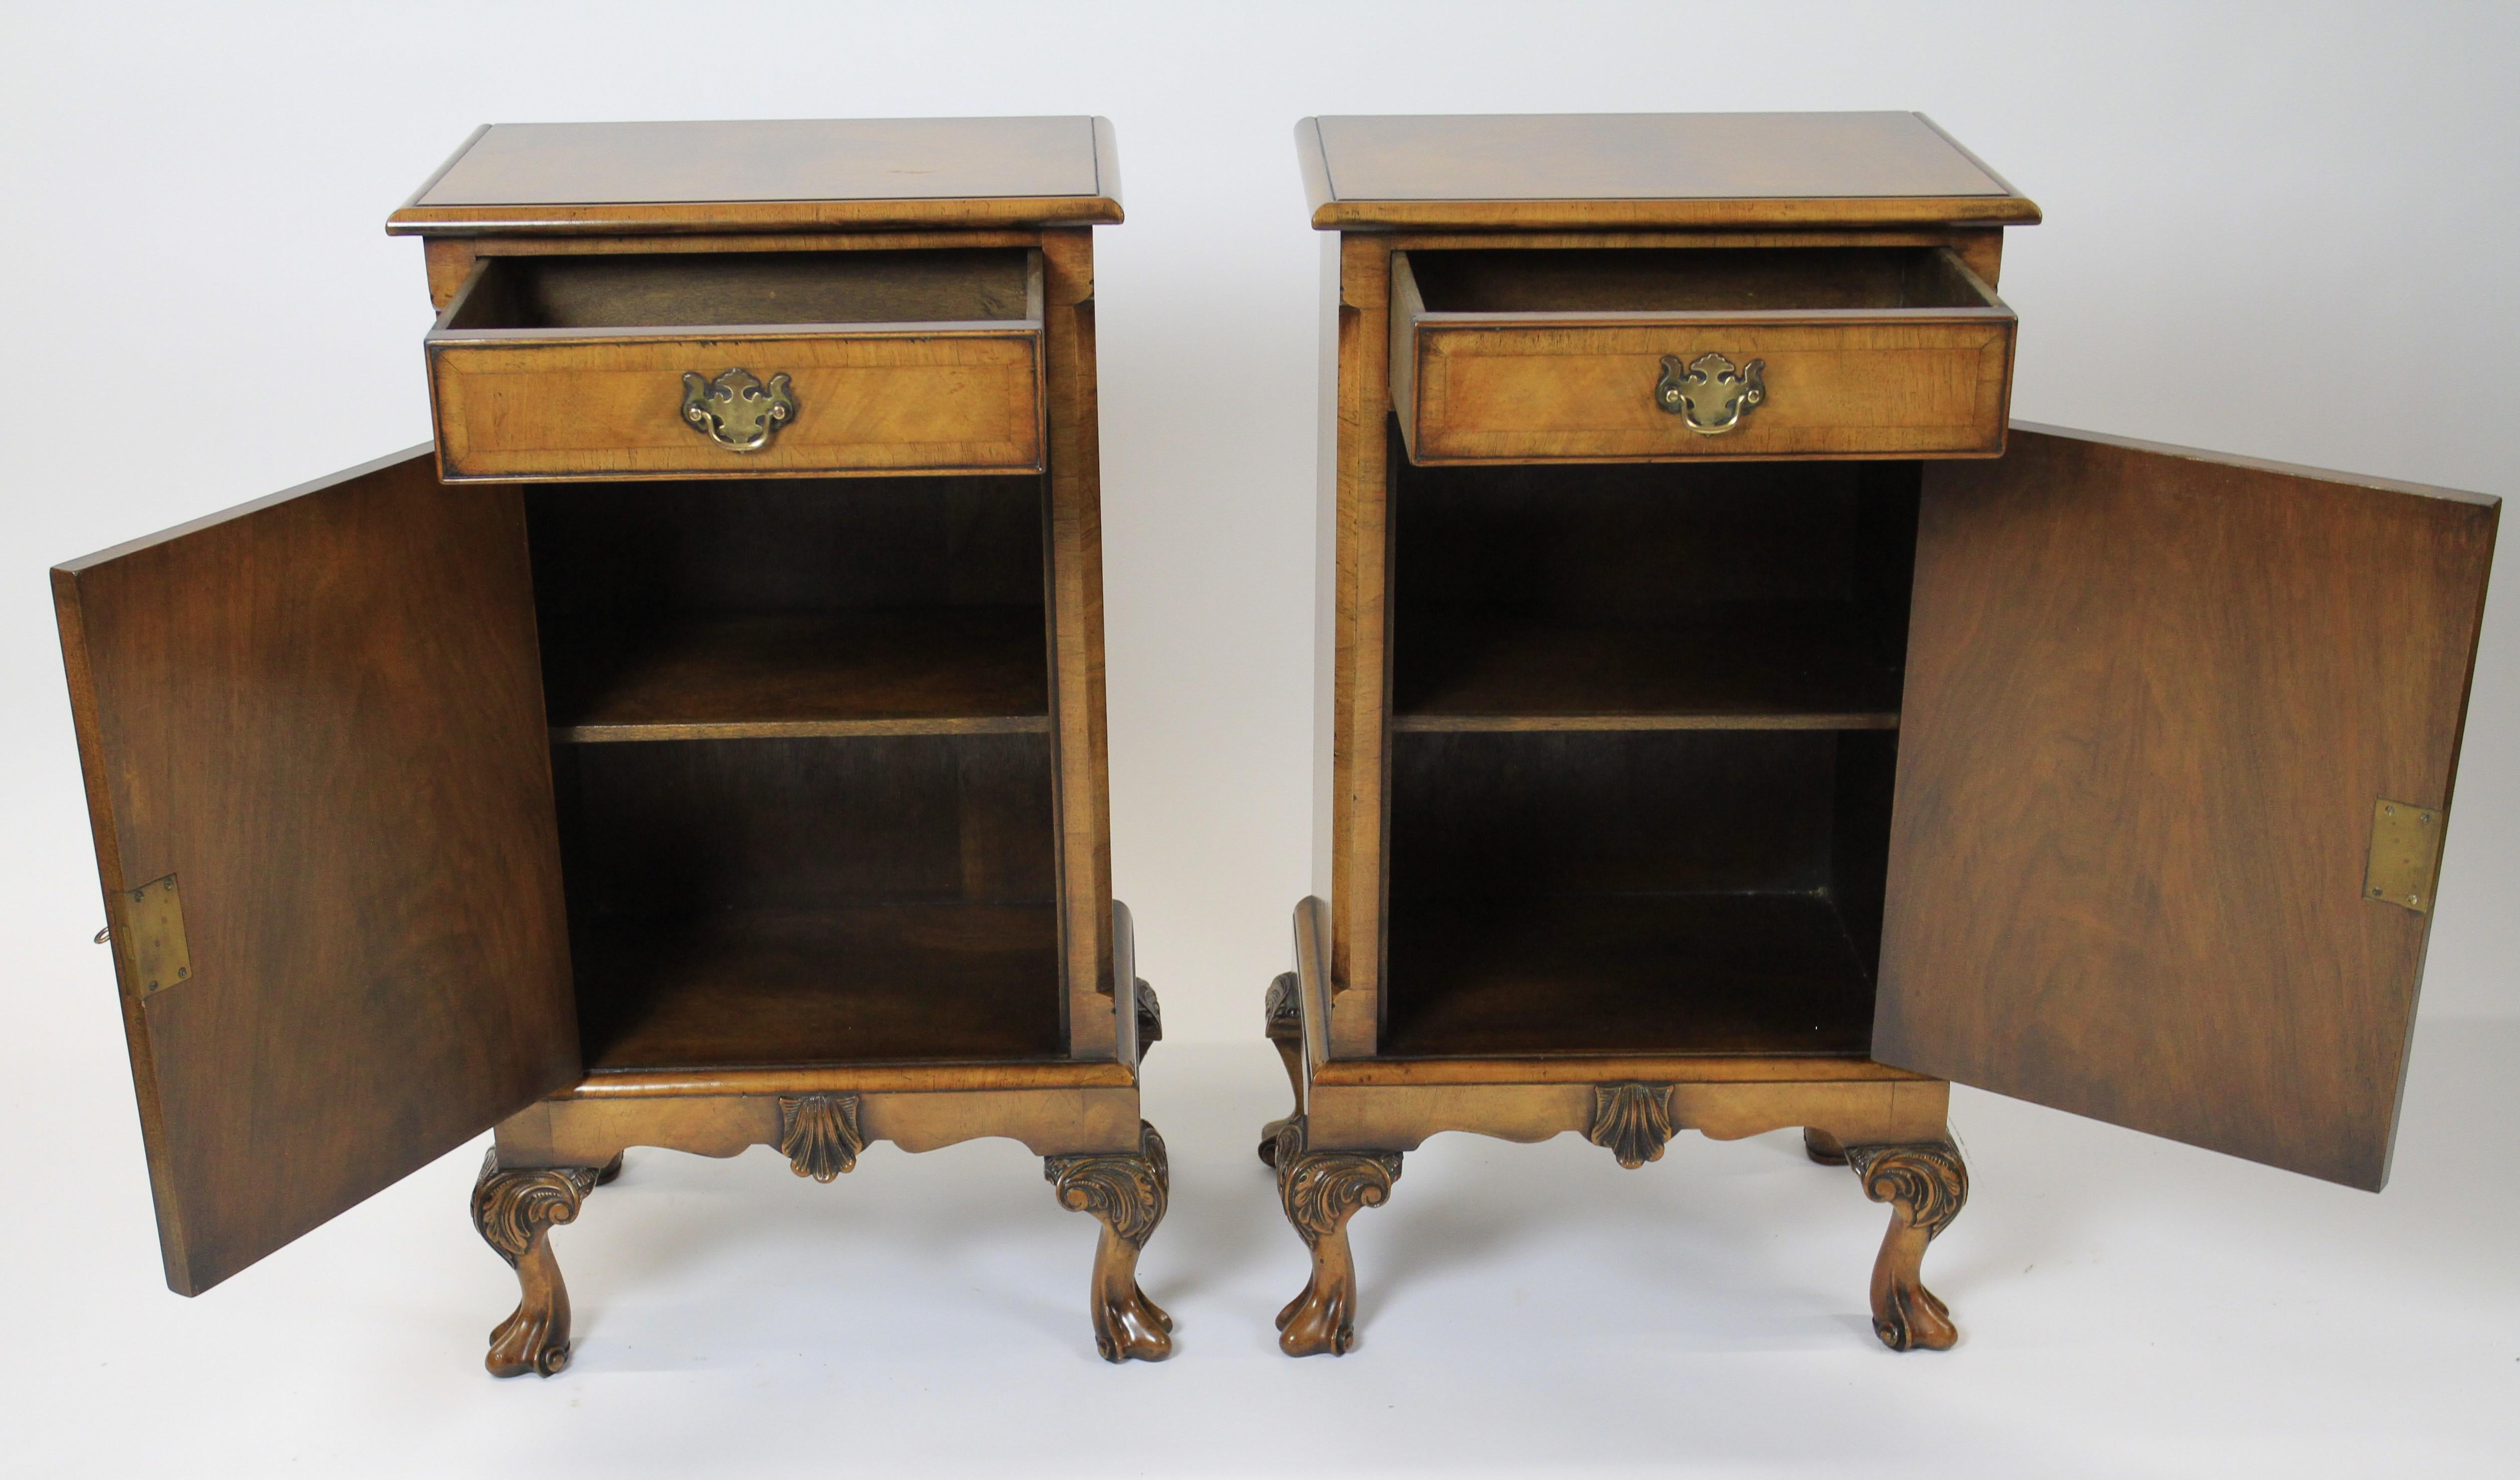 Pair Walnut Queen Anne style  Bedside Cupboards circa 1930s
Figured walnut tops with thumb mould edge.
single drawer on top. 
Single door with Queen Anne Style mould Arch  detail 
Working locks & keys open to reveal single shelf interior
Shaped